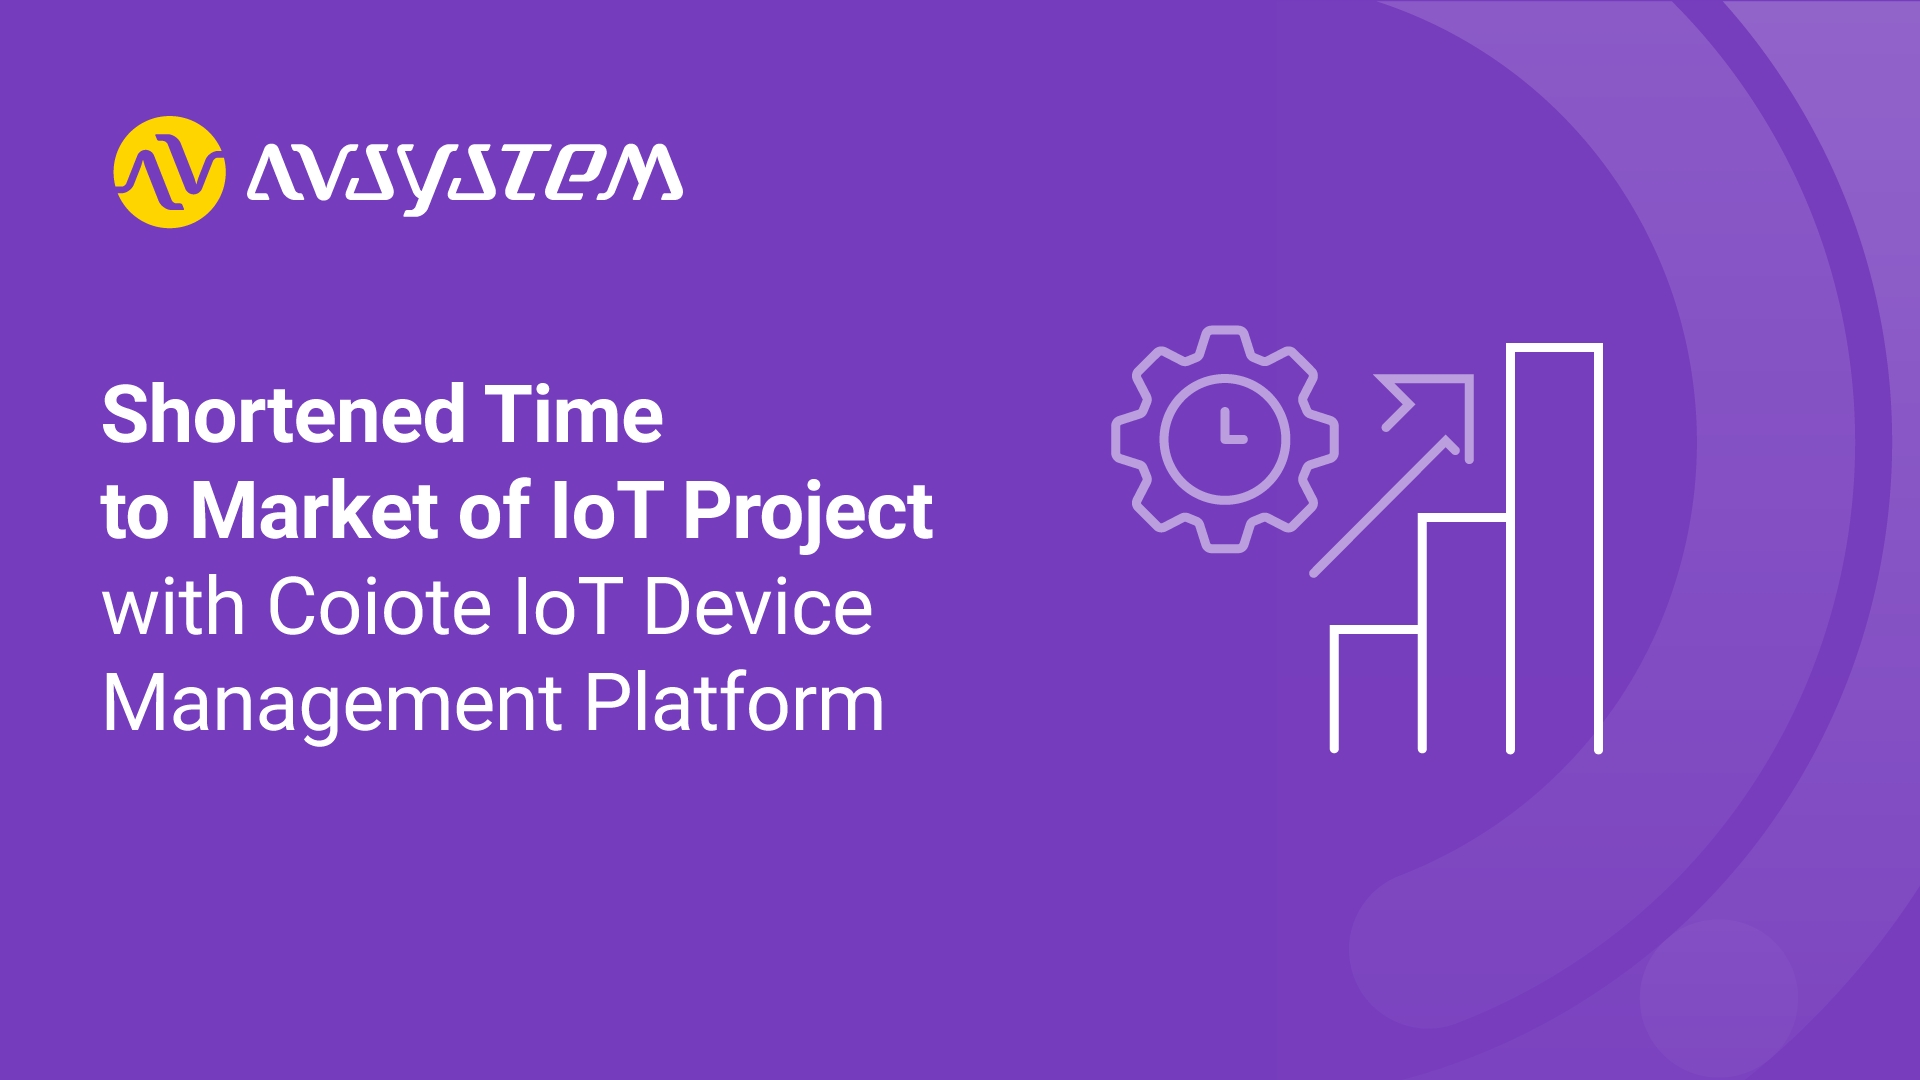 CASE STUDY: Shortened Time to Market of IoT Project with Coiote IoT Device Management Platform